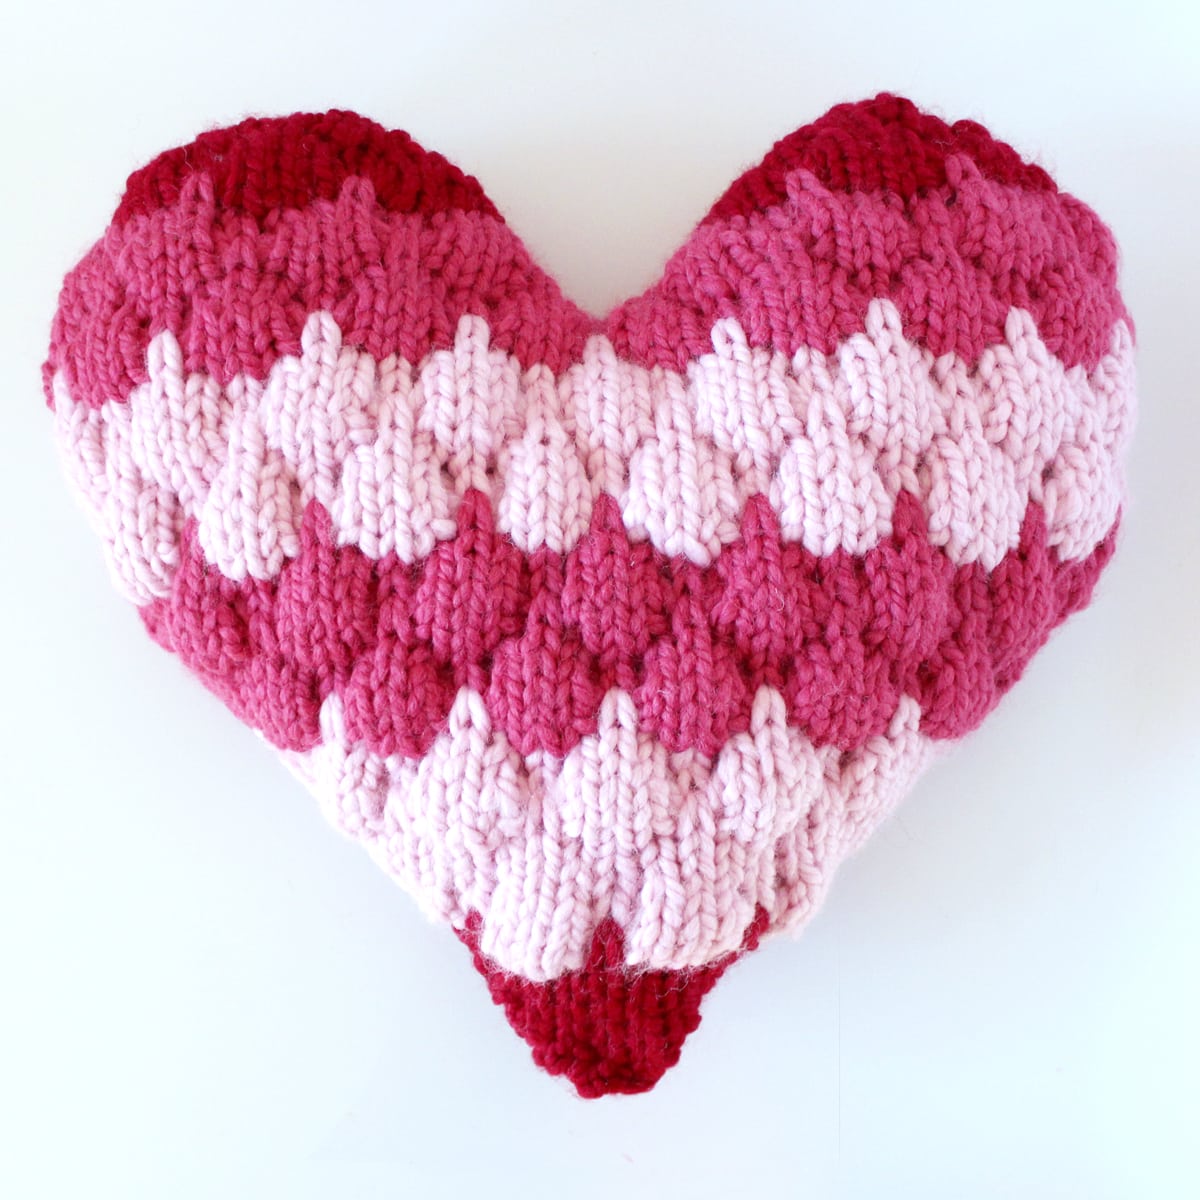 Bubble Stitch Heart Pillow in red and pink yarn colors.